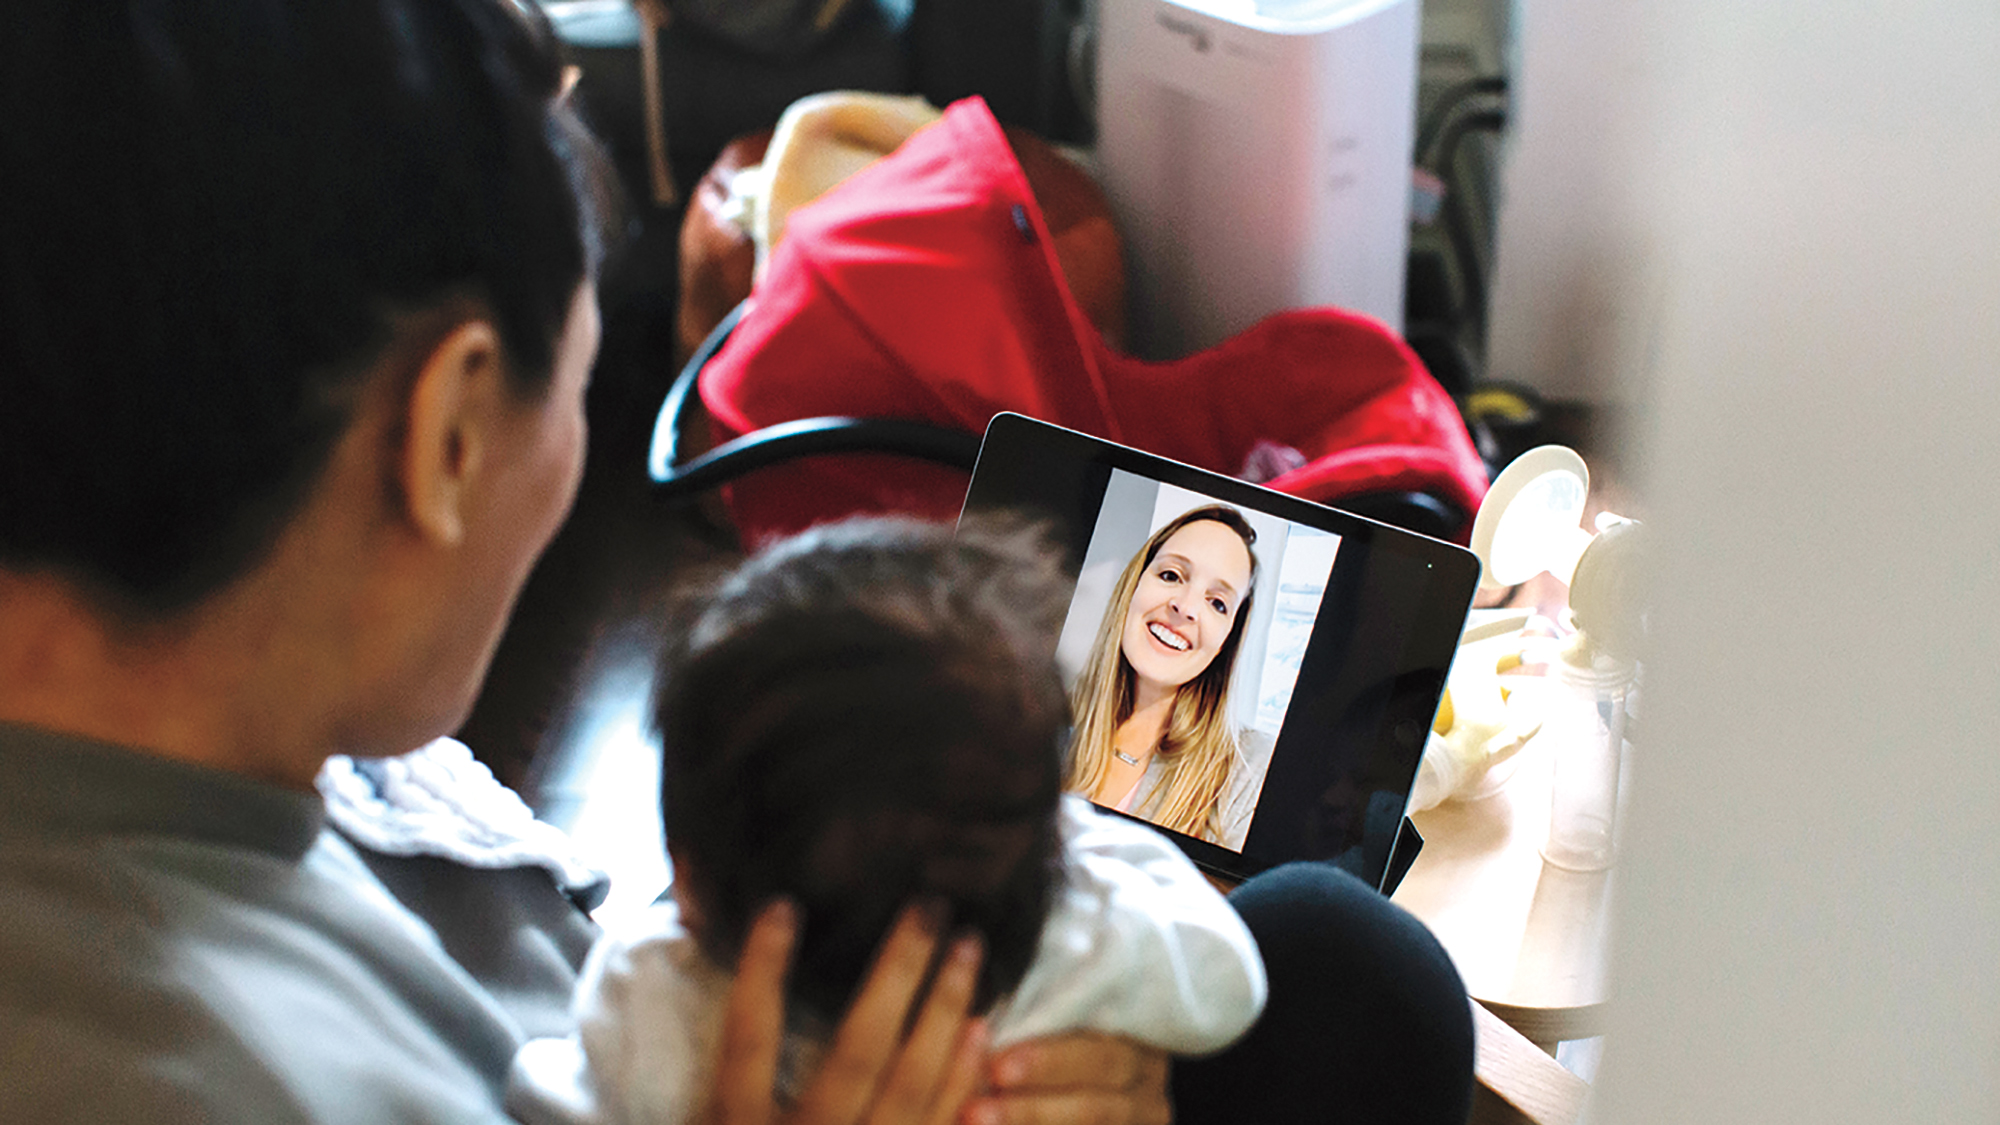 The back of a new mom's head holding up a newborn baby to a smiling woman on an iPad screen for a story on new moms not being ok during the pandemic